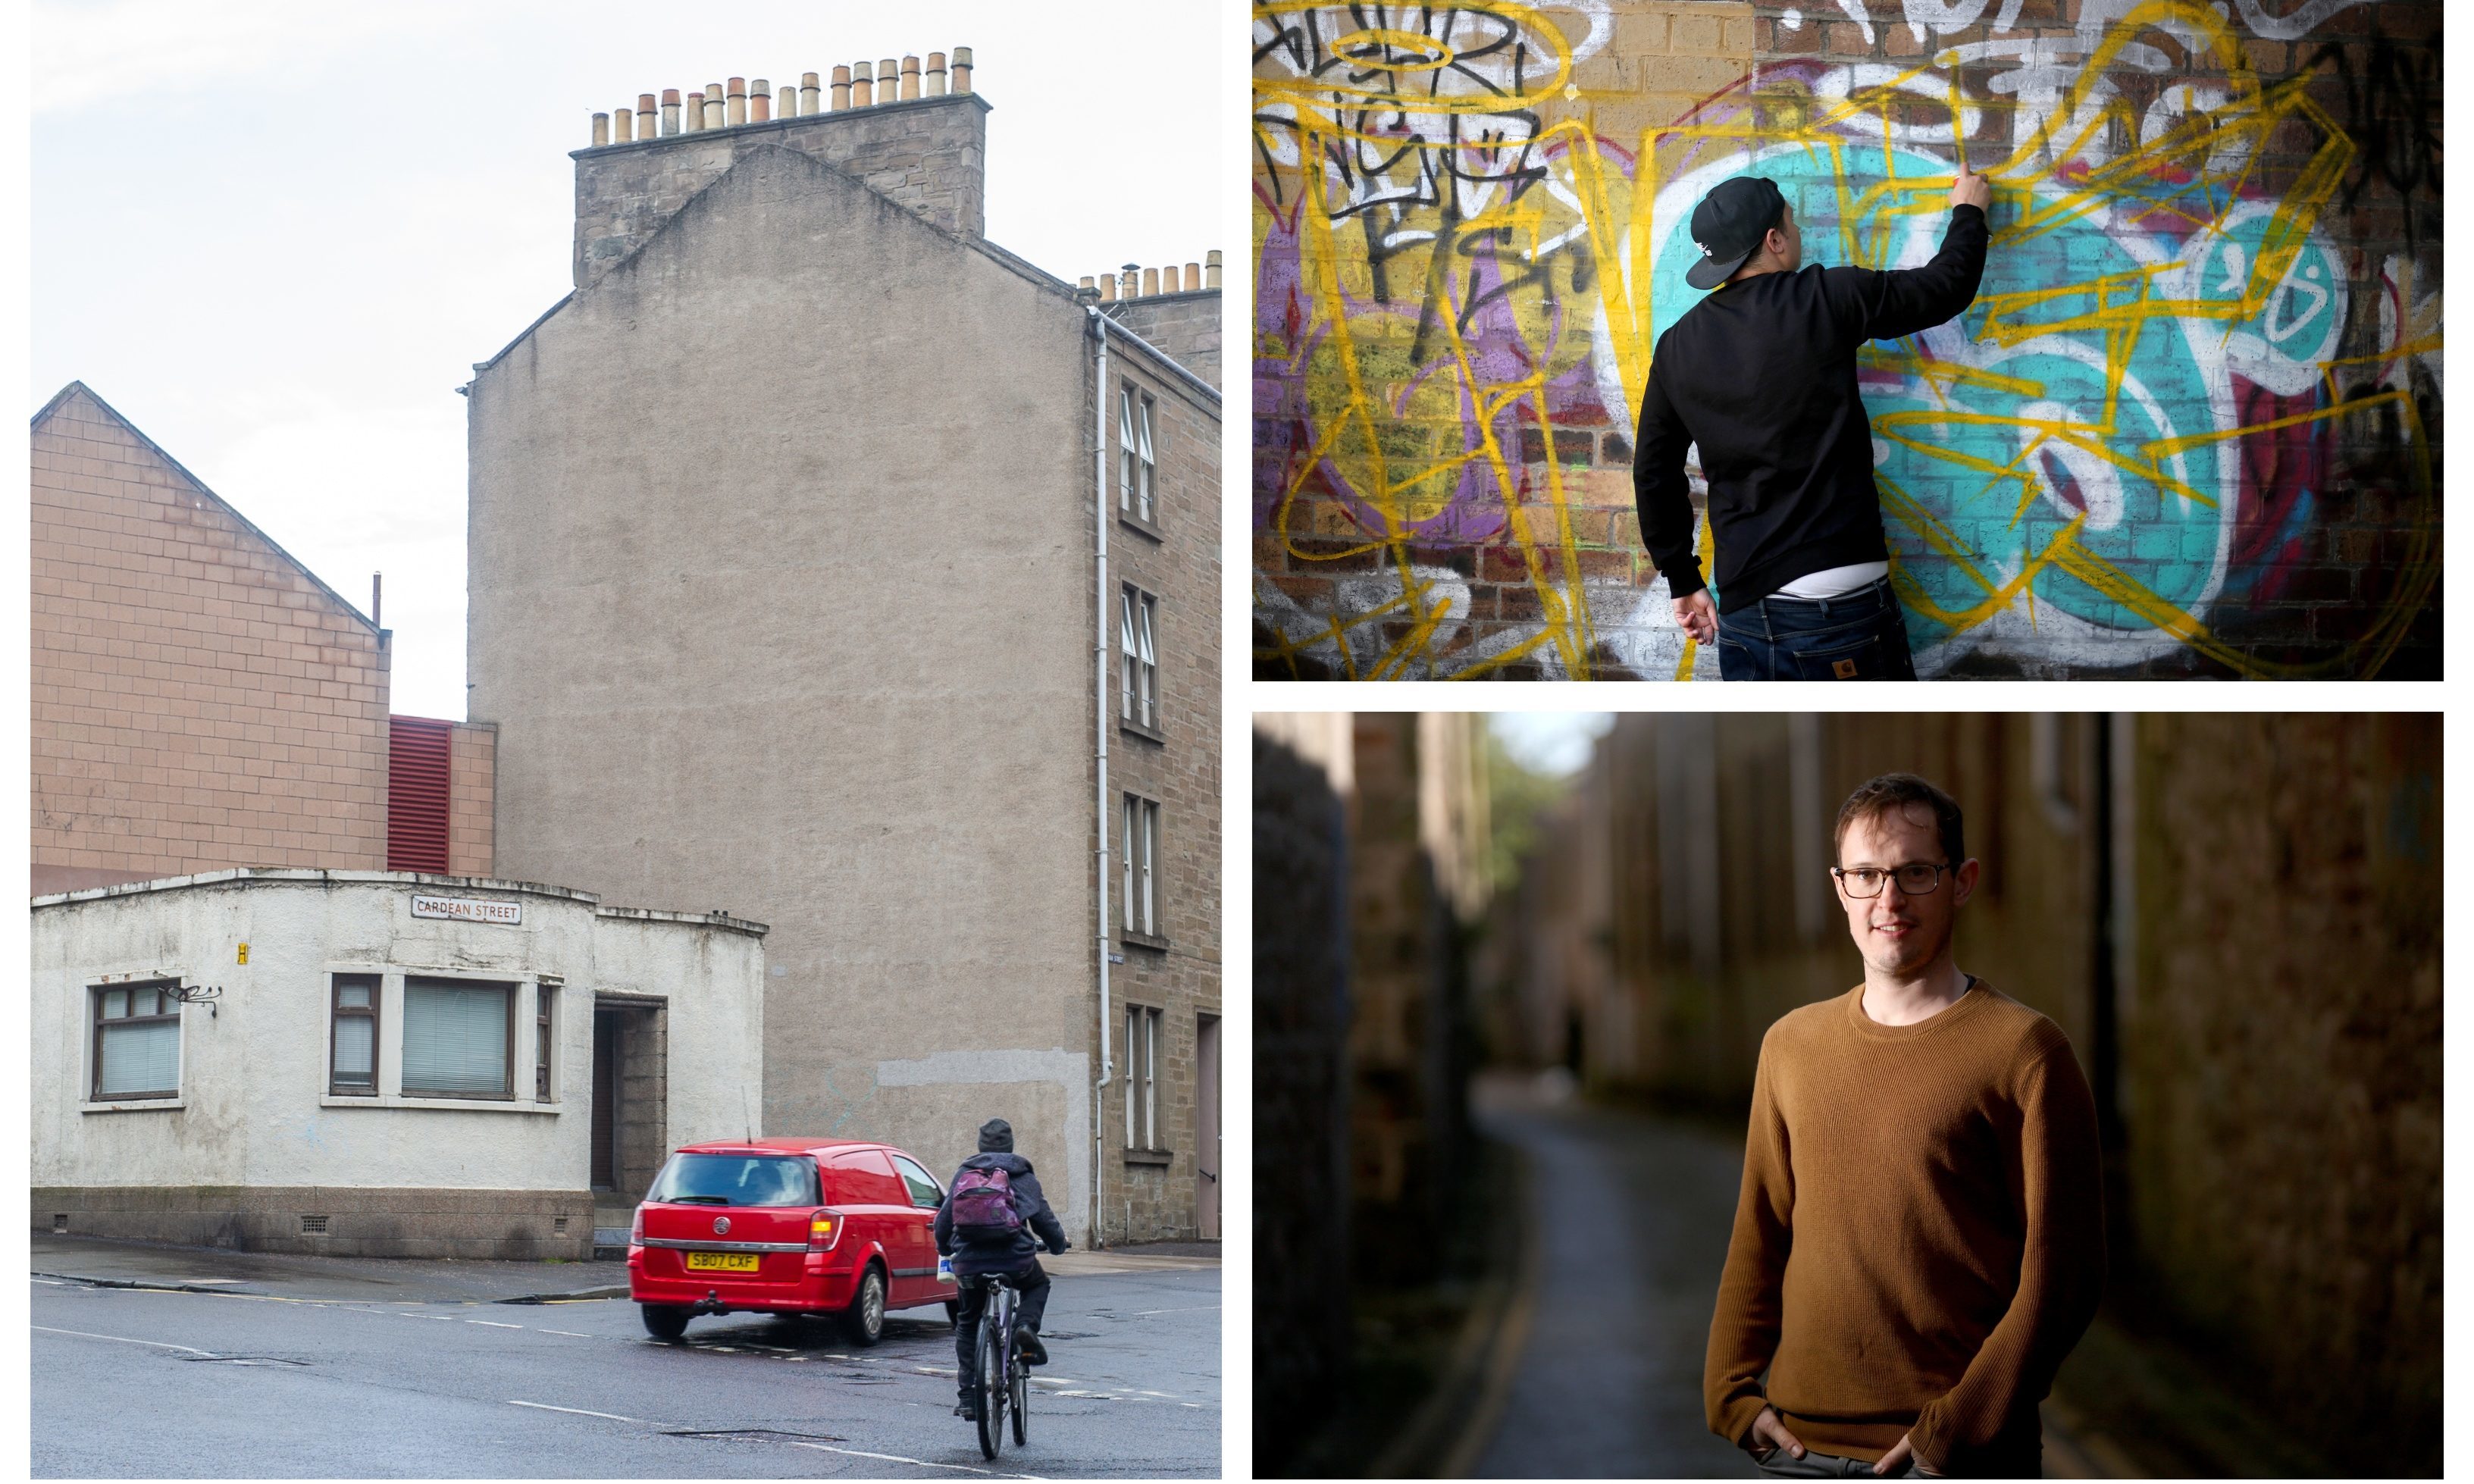 The wall pictured, left, will be the location of the new Dundee mural. Right shows Russel Pepper and a graffiti artists at work in Dundee.